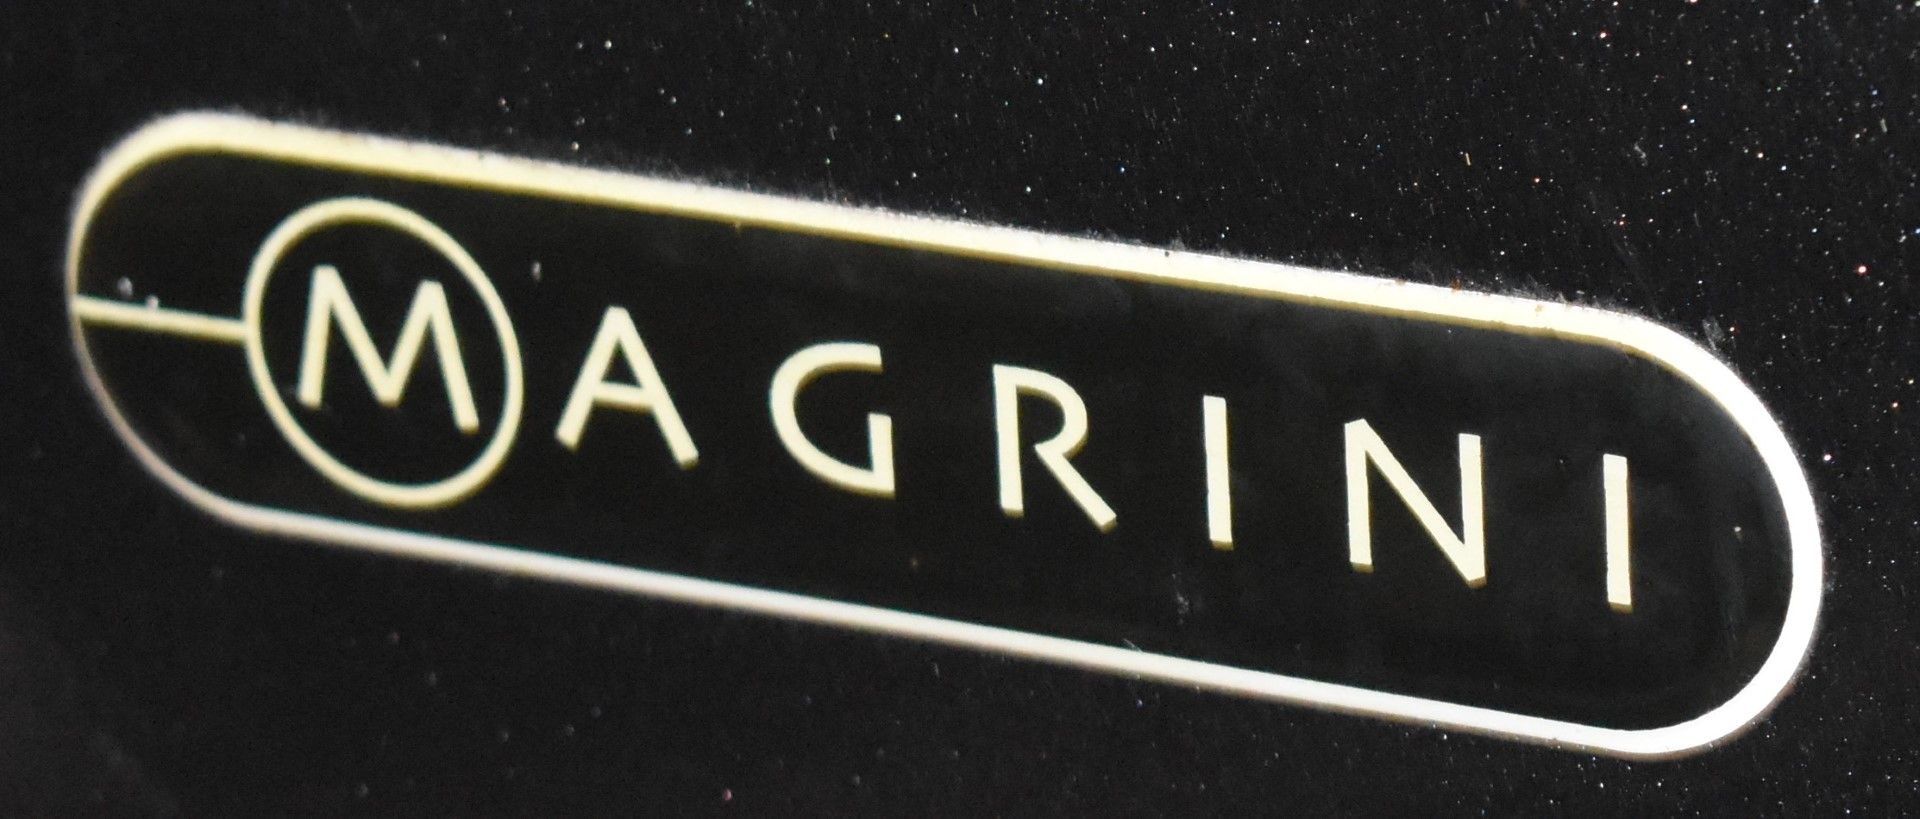 1 x Magrini 3 Group Coffee Espresso Machine With Stainless Steel and Black Finish - H47 x W106 x D57 - Image 3 of 9